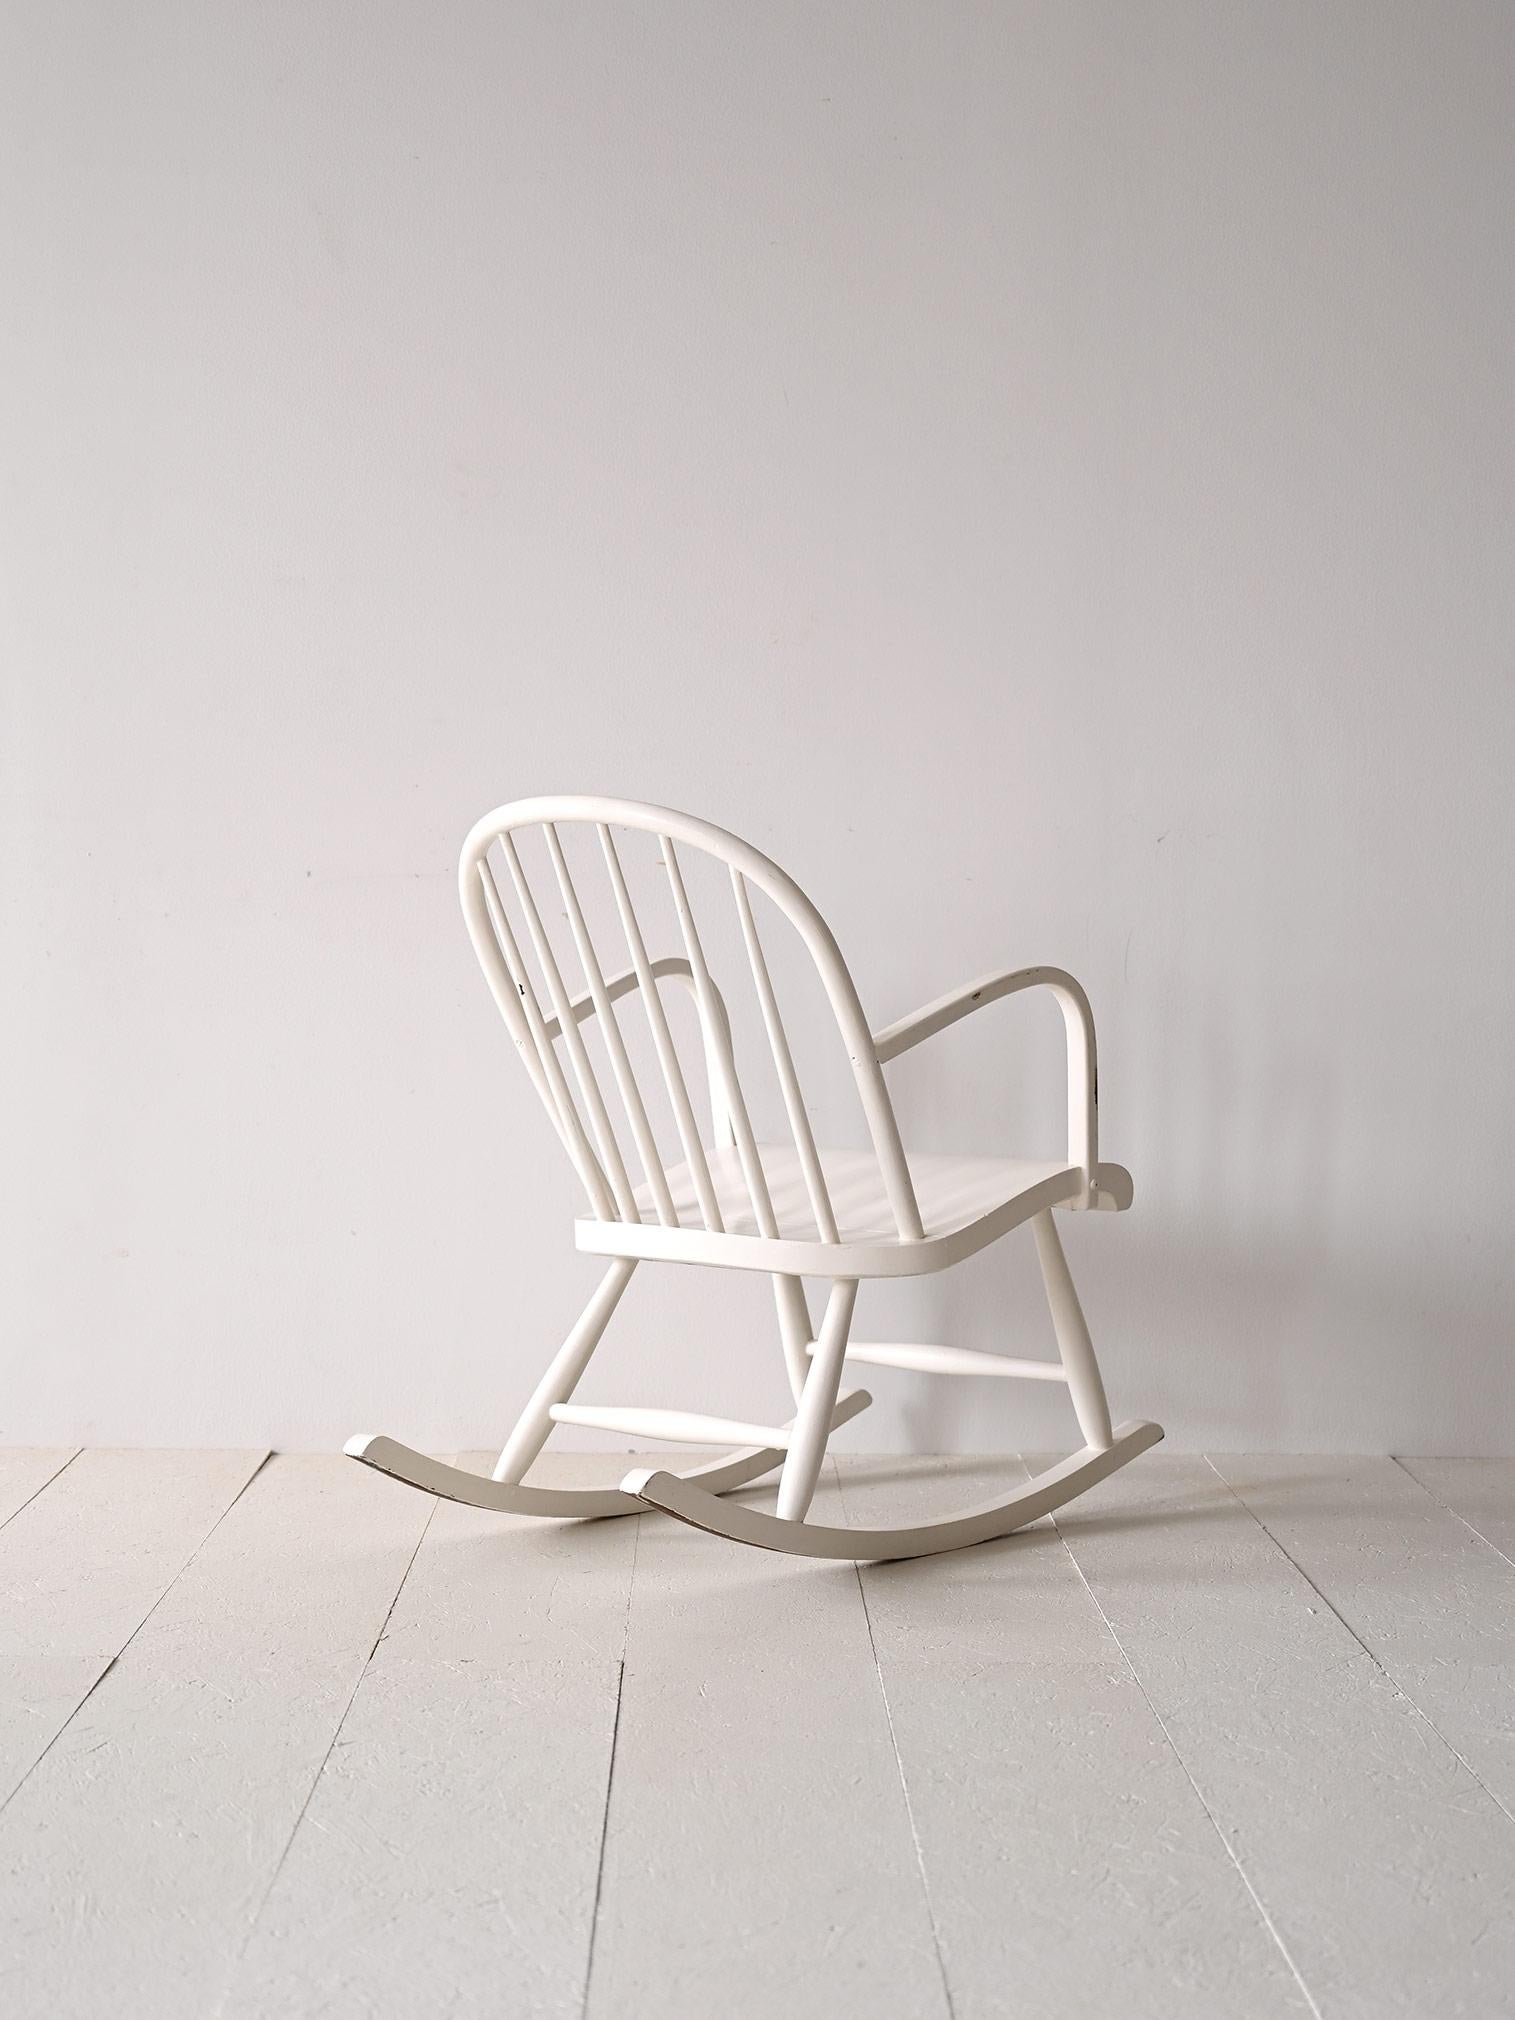 Scandinavian rocking chair made of wood painted white.

A piece of furniture that refers to the typical shape of classic Scandinavian wooden 'Pinstolar' chairs.
In addition to the backrest, which consists of wooden stems, there is a seat with